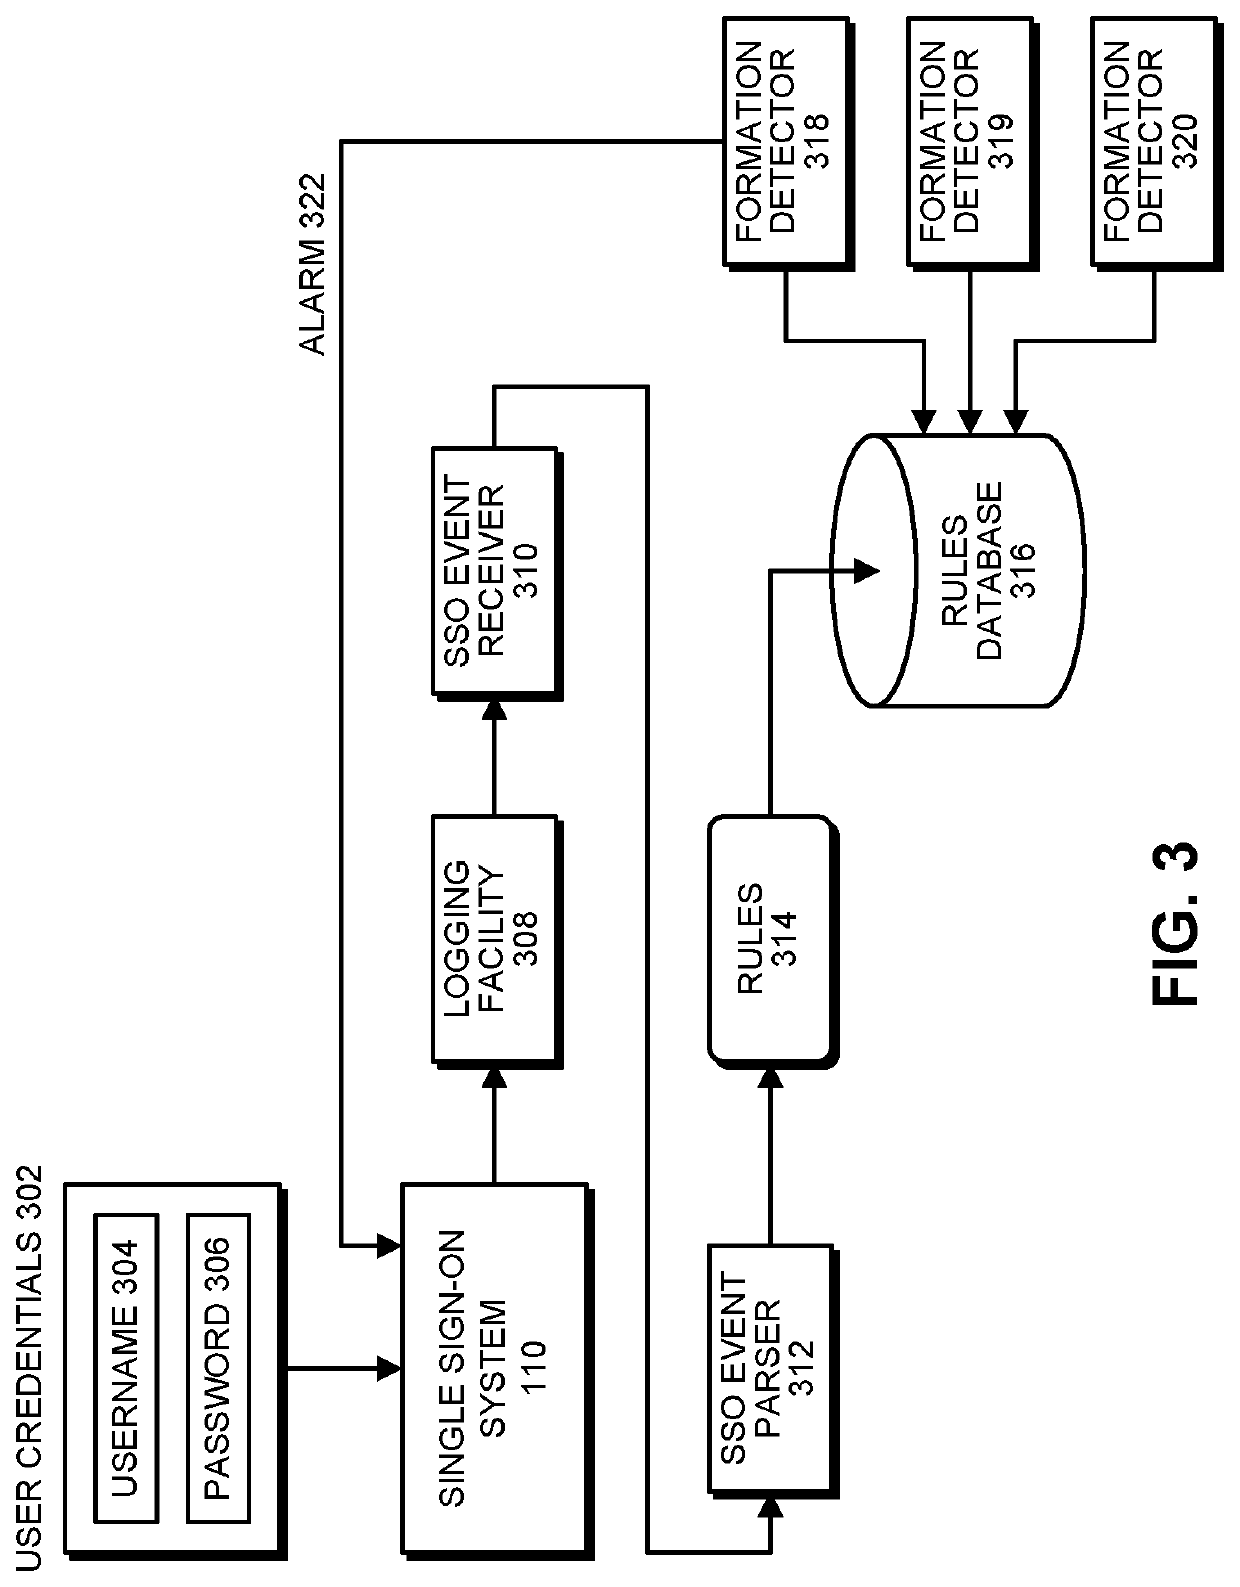 System and method for protecting online resources against guided username guessing attacks